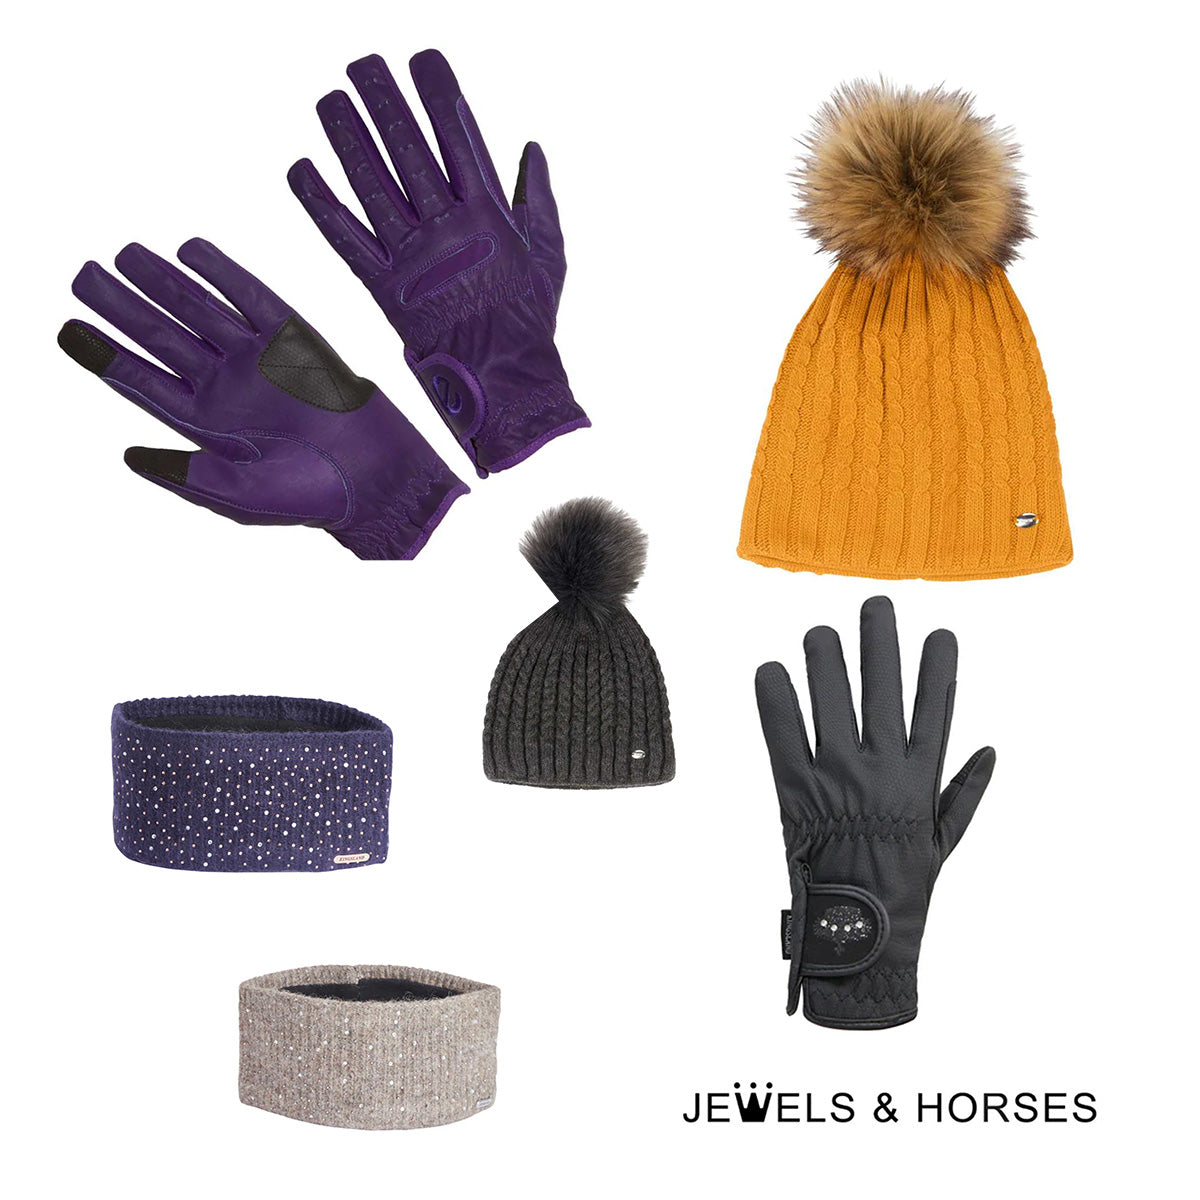 The best winter horse riding gloves and other winter accessories